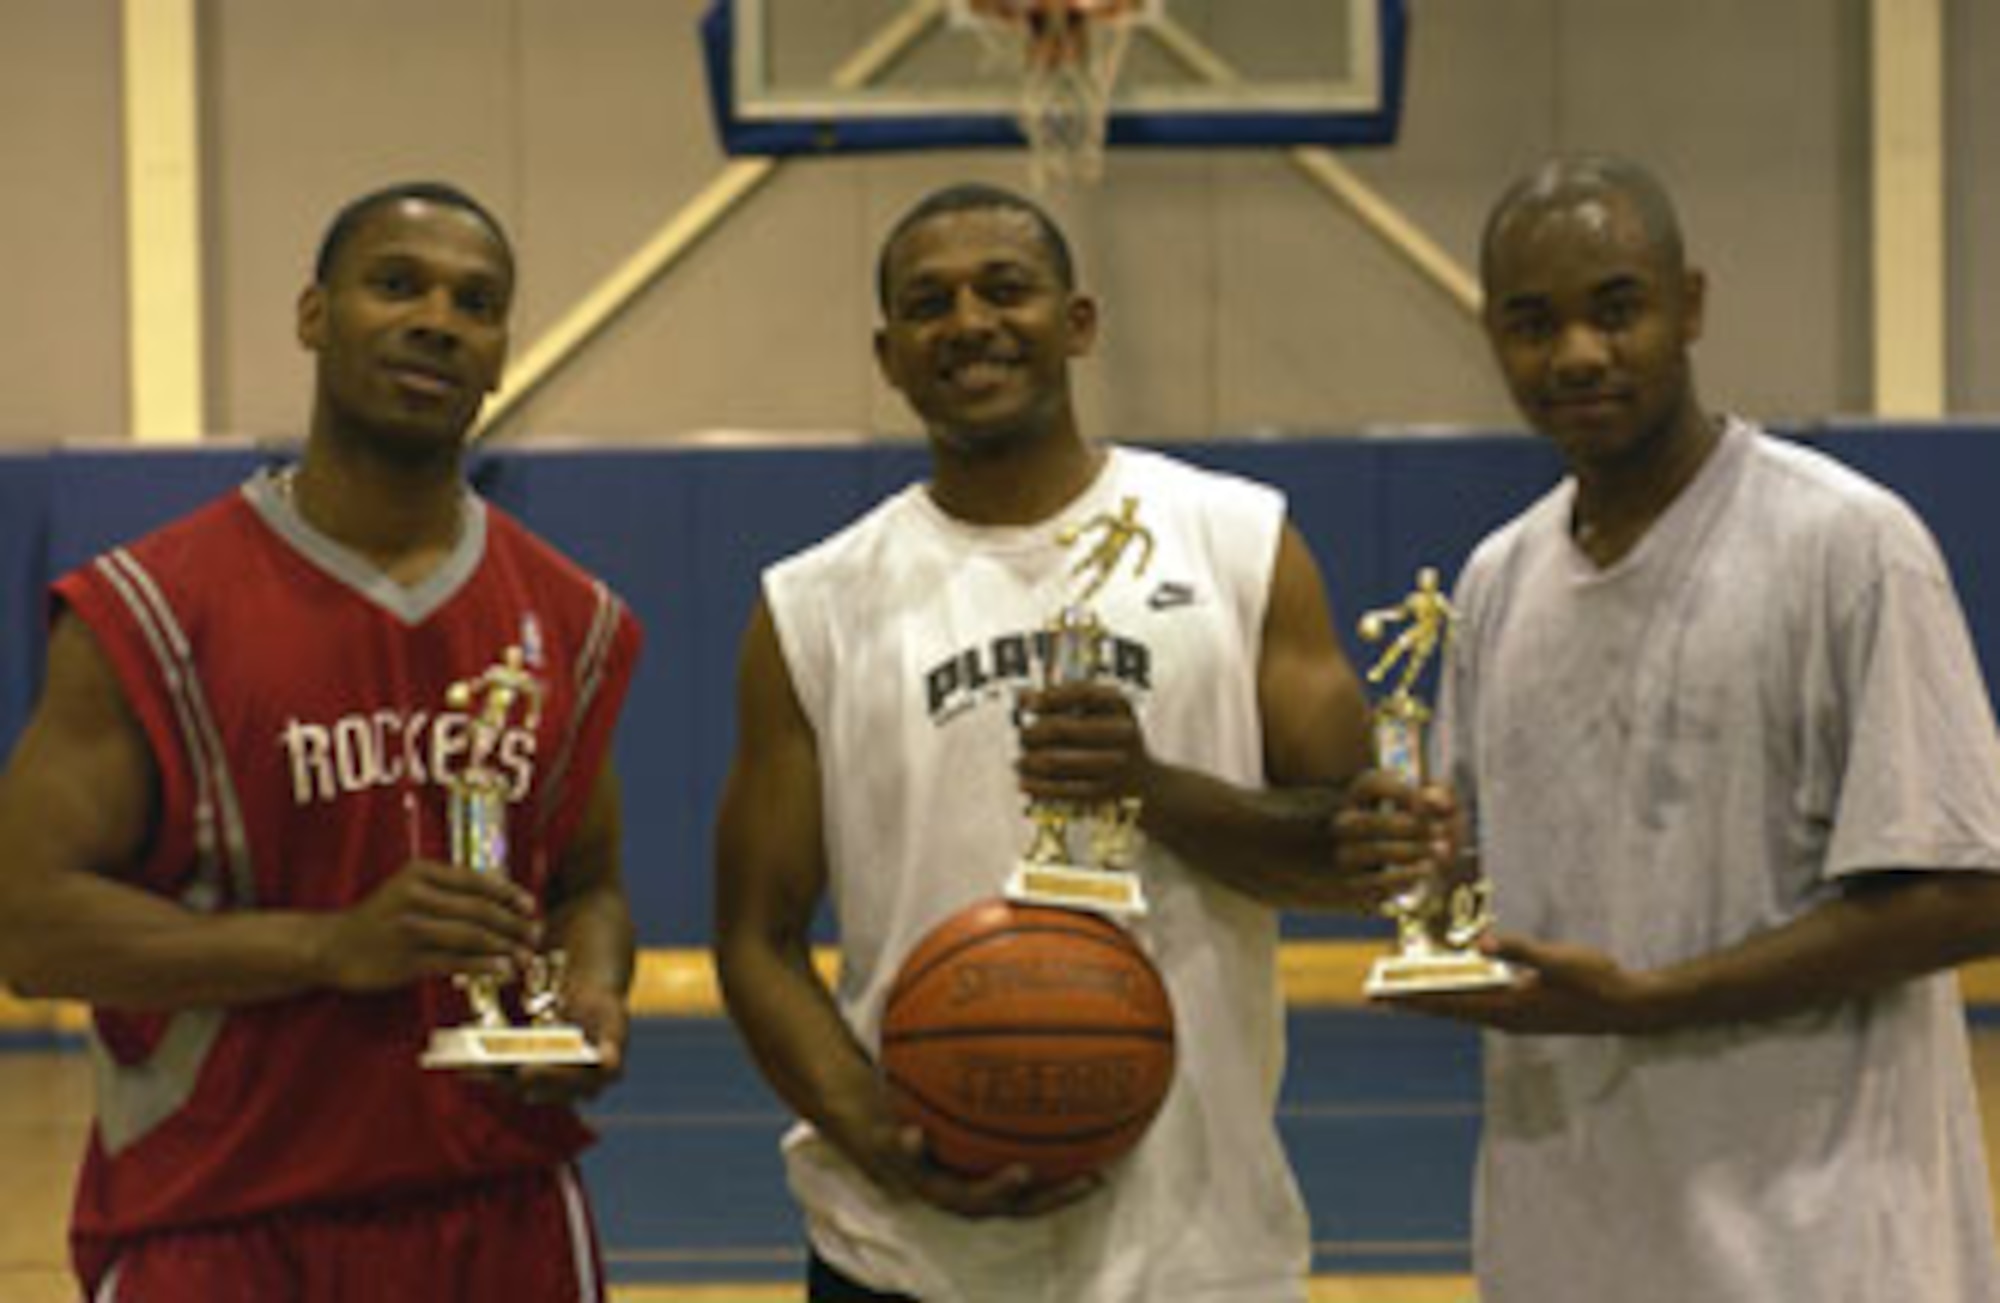 The 452nd All Star team took the top spot at the first Fit to Fight - Keep Moving Initiative event, a 3-on-3 double elimination basketball tournament. (Left to right) Will Horton, 452nd Aerospace Medicine Squadron, Willie Carter, 452nd AMDS and Dwayne Daniels, 452nd Services Squadron.  Four teams entered the AFRC initiated games, battling it out in a first to 15 double elimination tournament held at March Air Reserve Base.  (U.S. Air Force photo by Tech. Sgt Mike Blair)